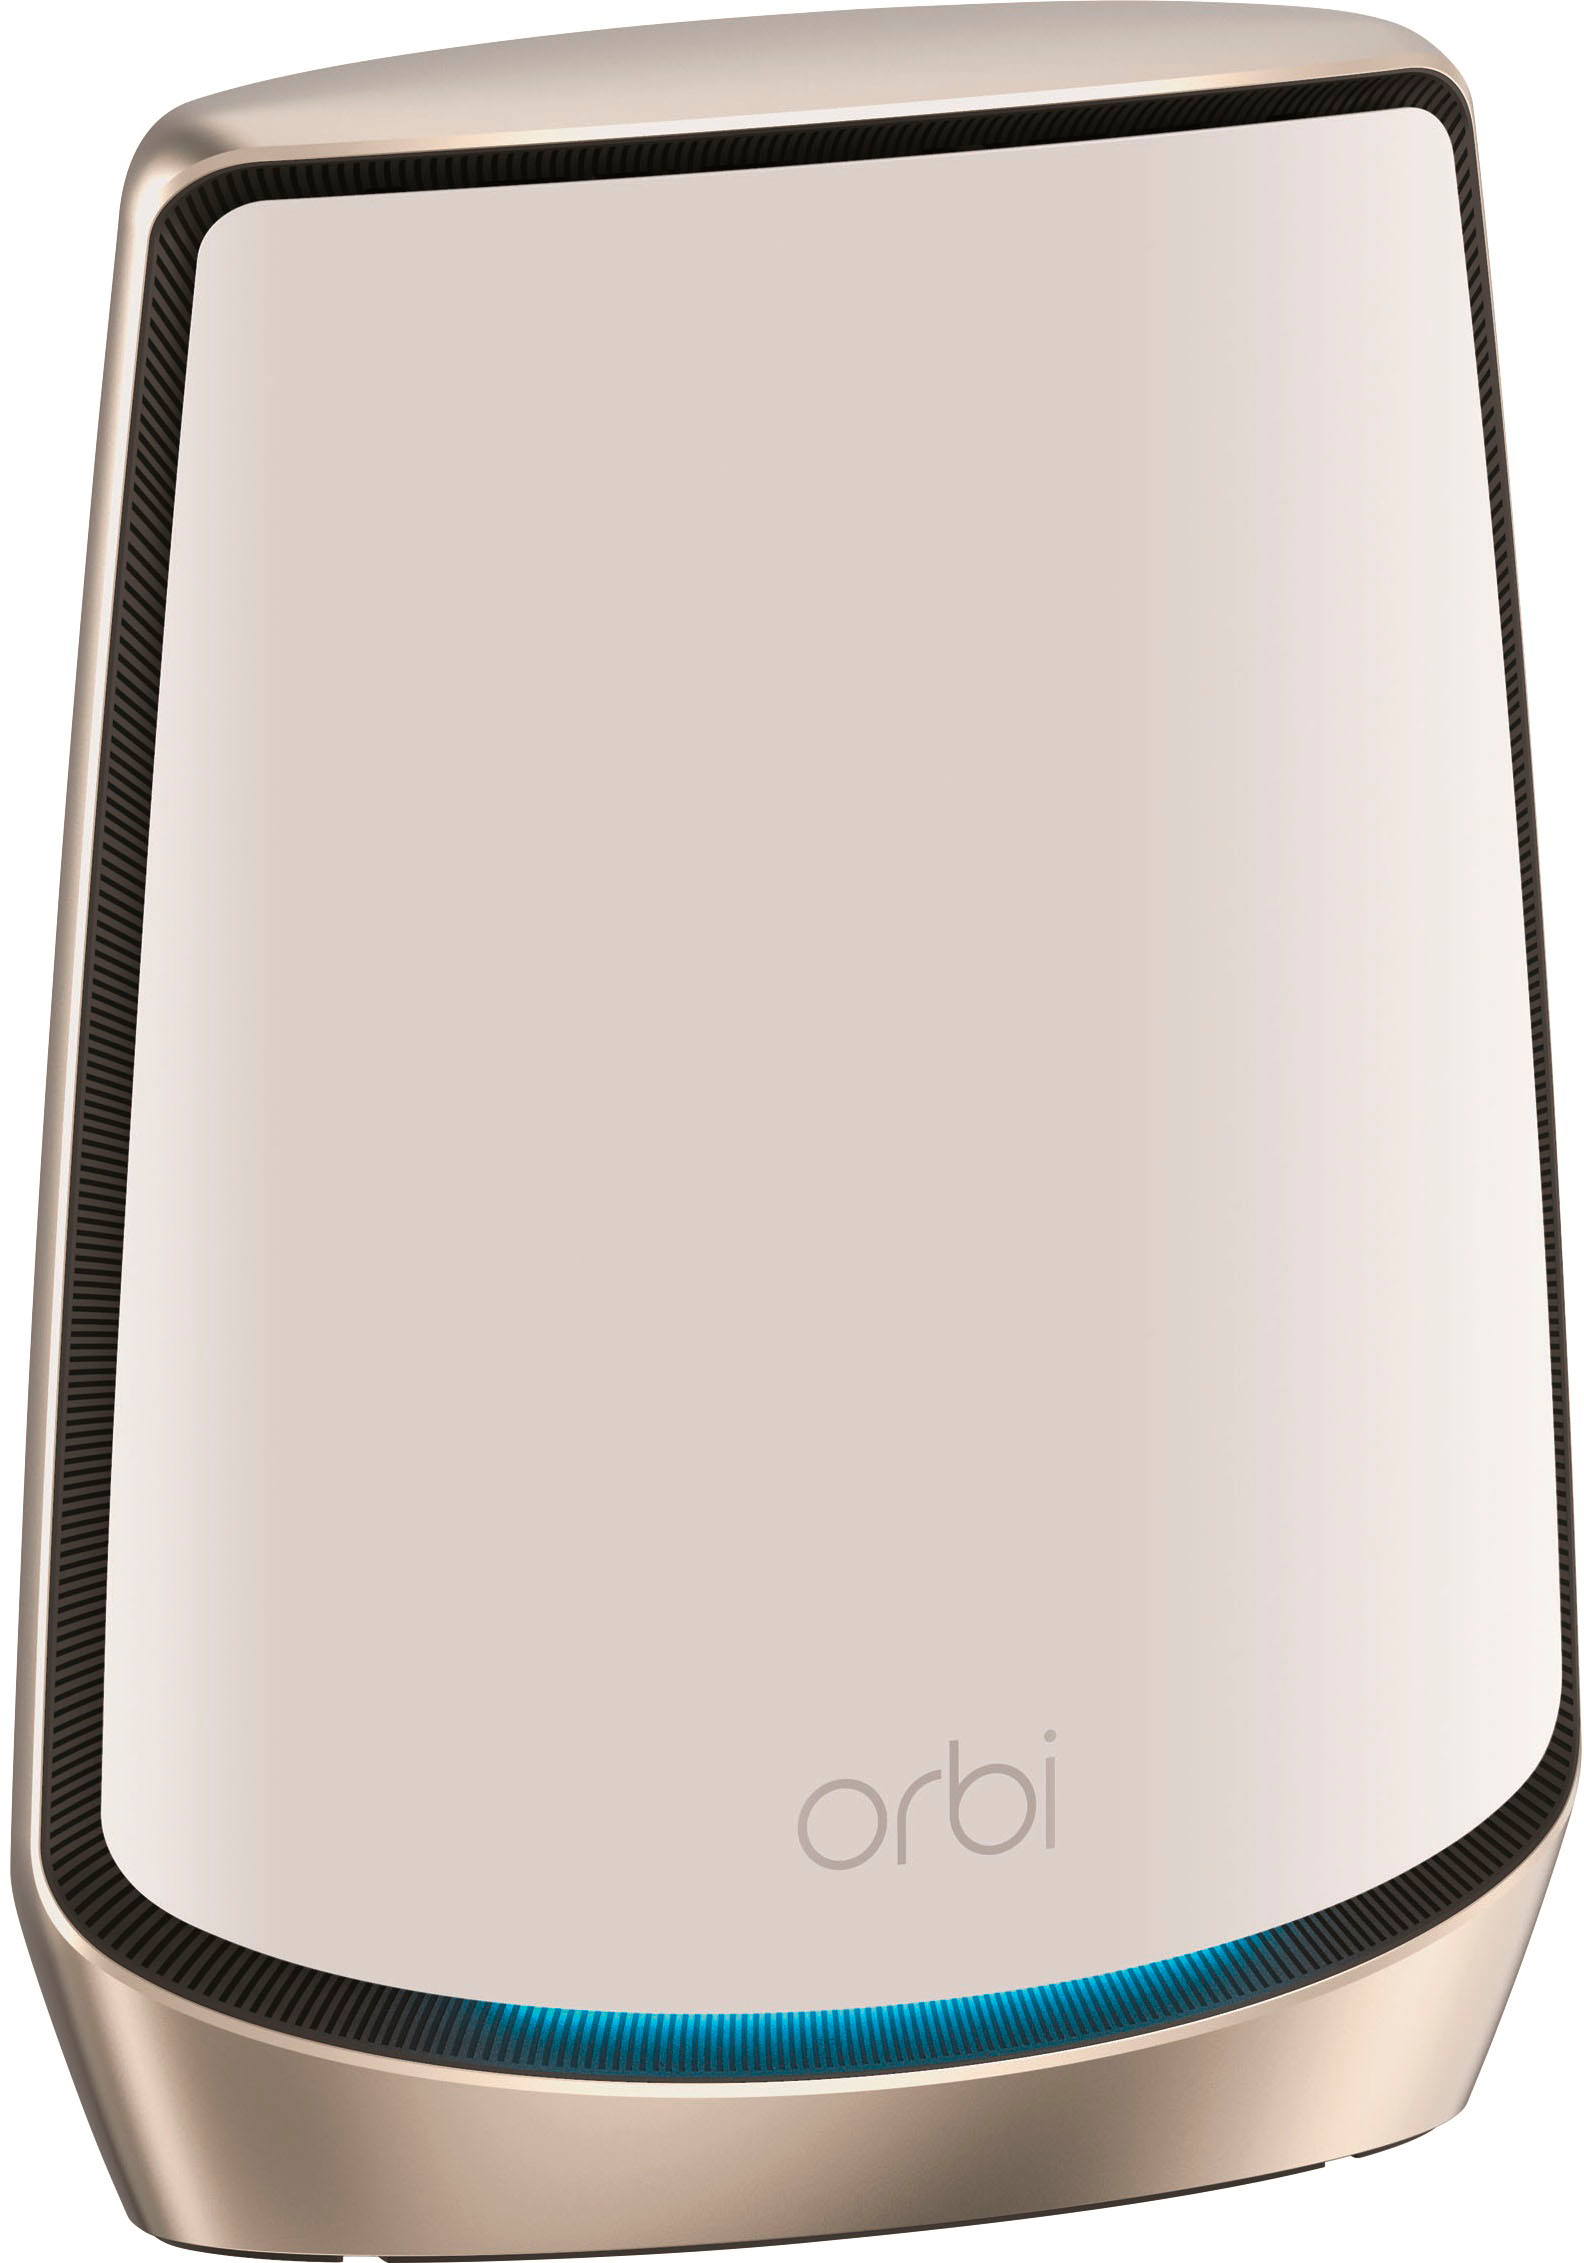 Angle View: NETGEAR - Orbi AX4200 Tri-Band Mesh WiFi 6 System with 32x8 DOCSIS 3.1 Cable Modem (2-Pack) - White